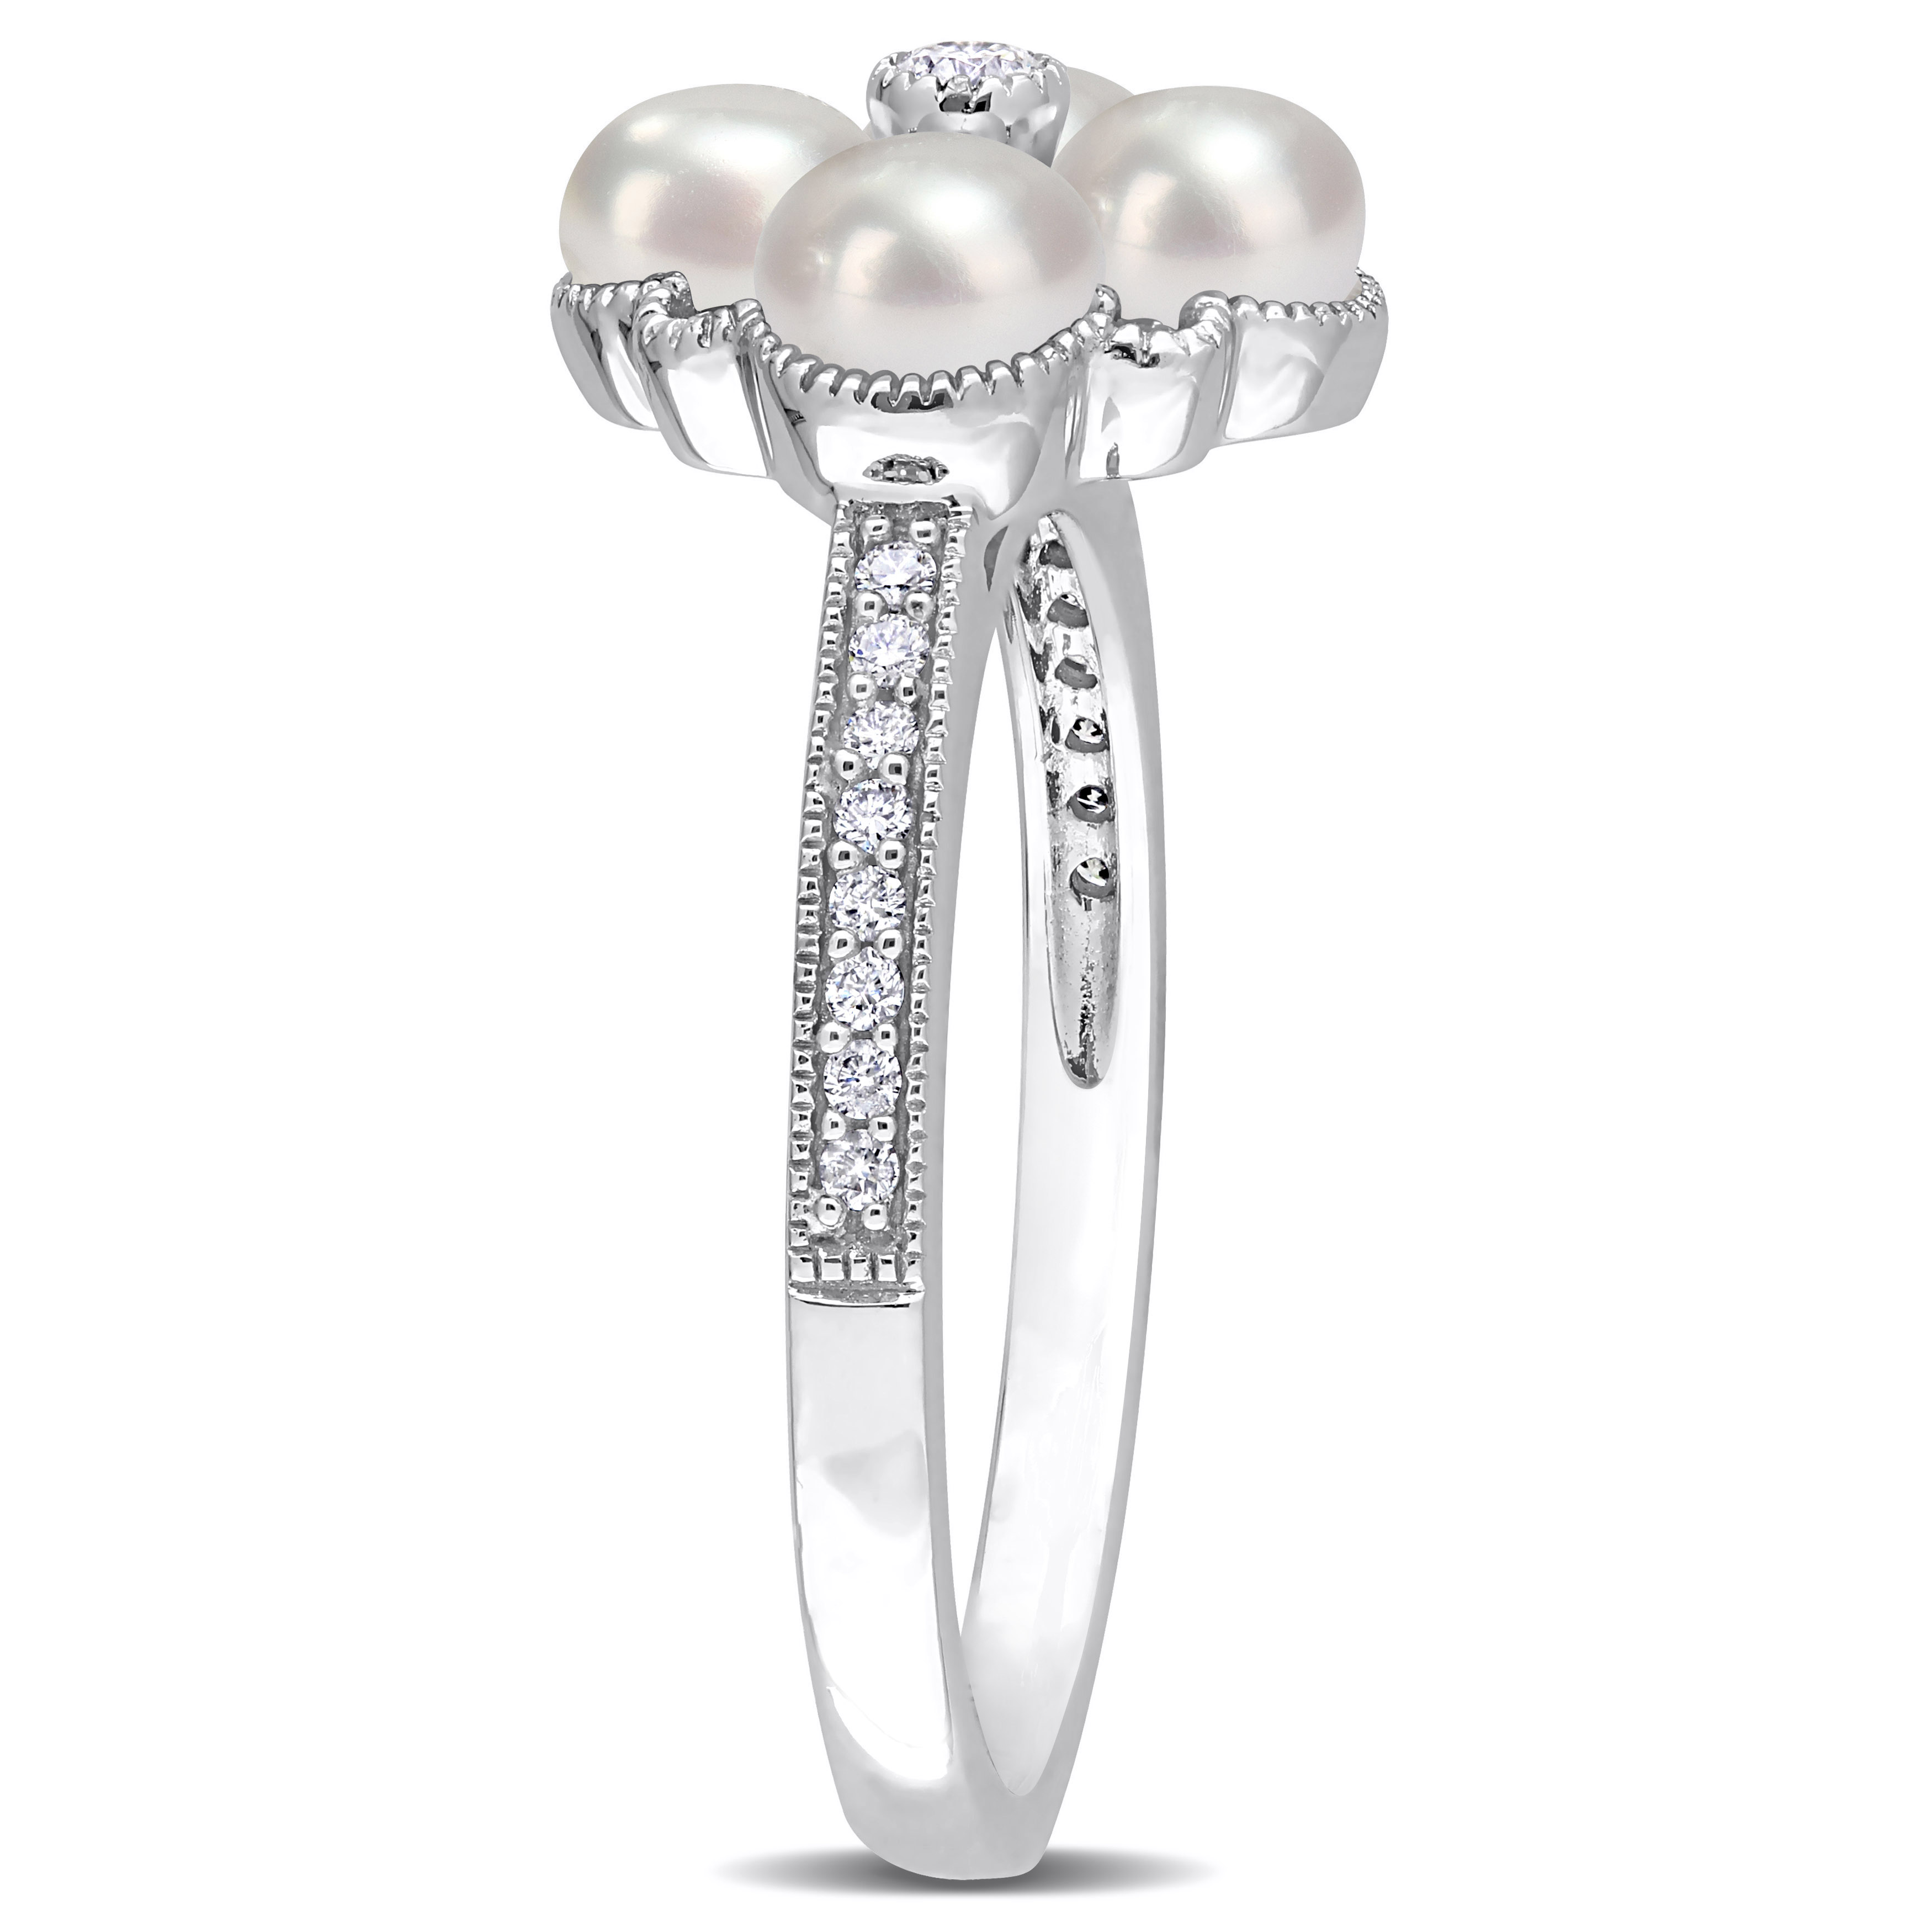 Cultured Freshwater Pearl and 1/6 CT TDW Diamond Cluster Ring in 14k White Gold